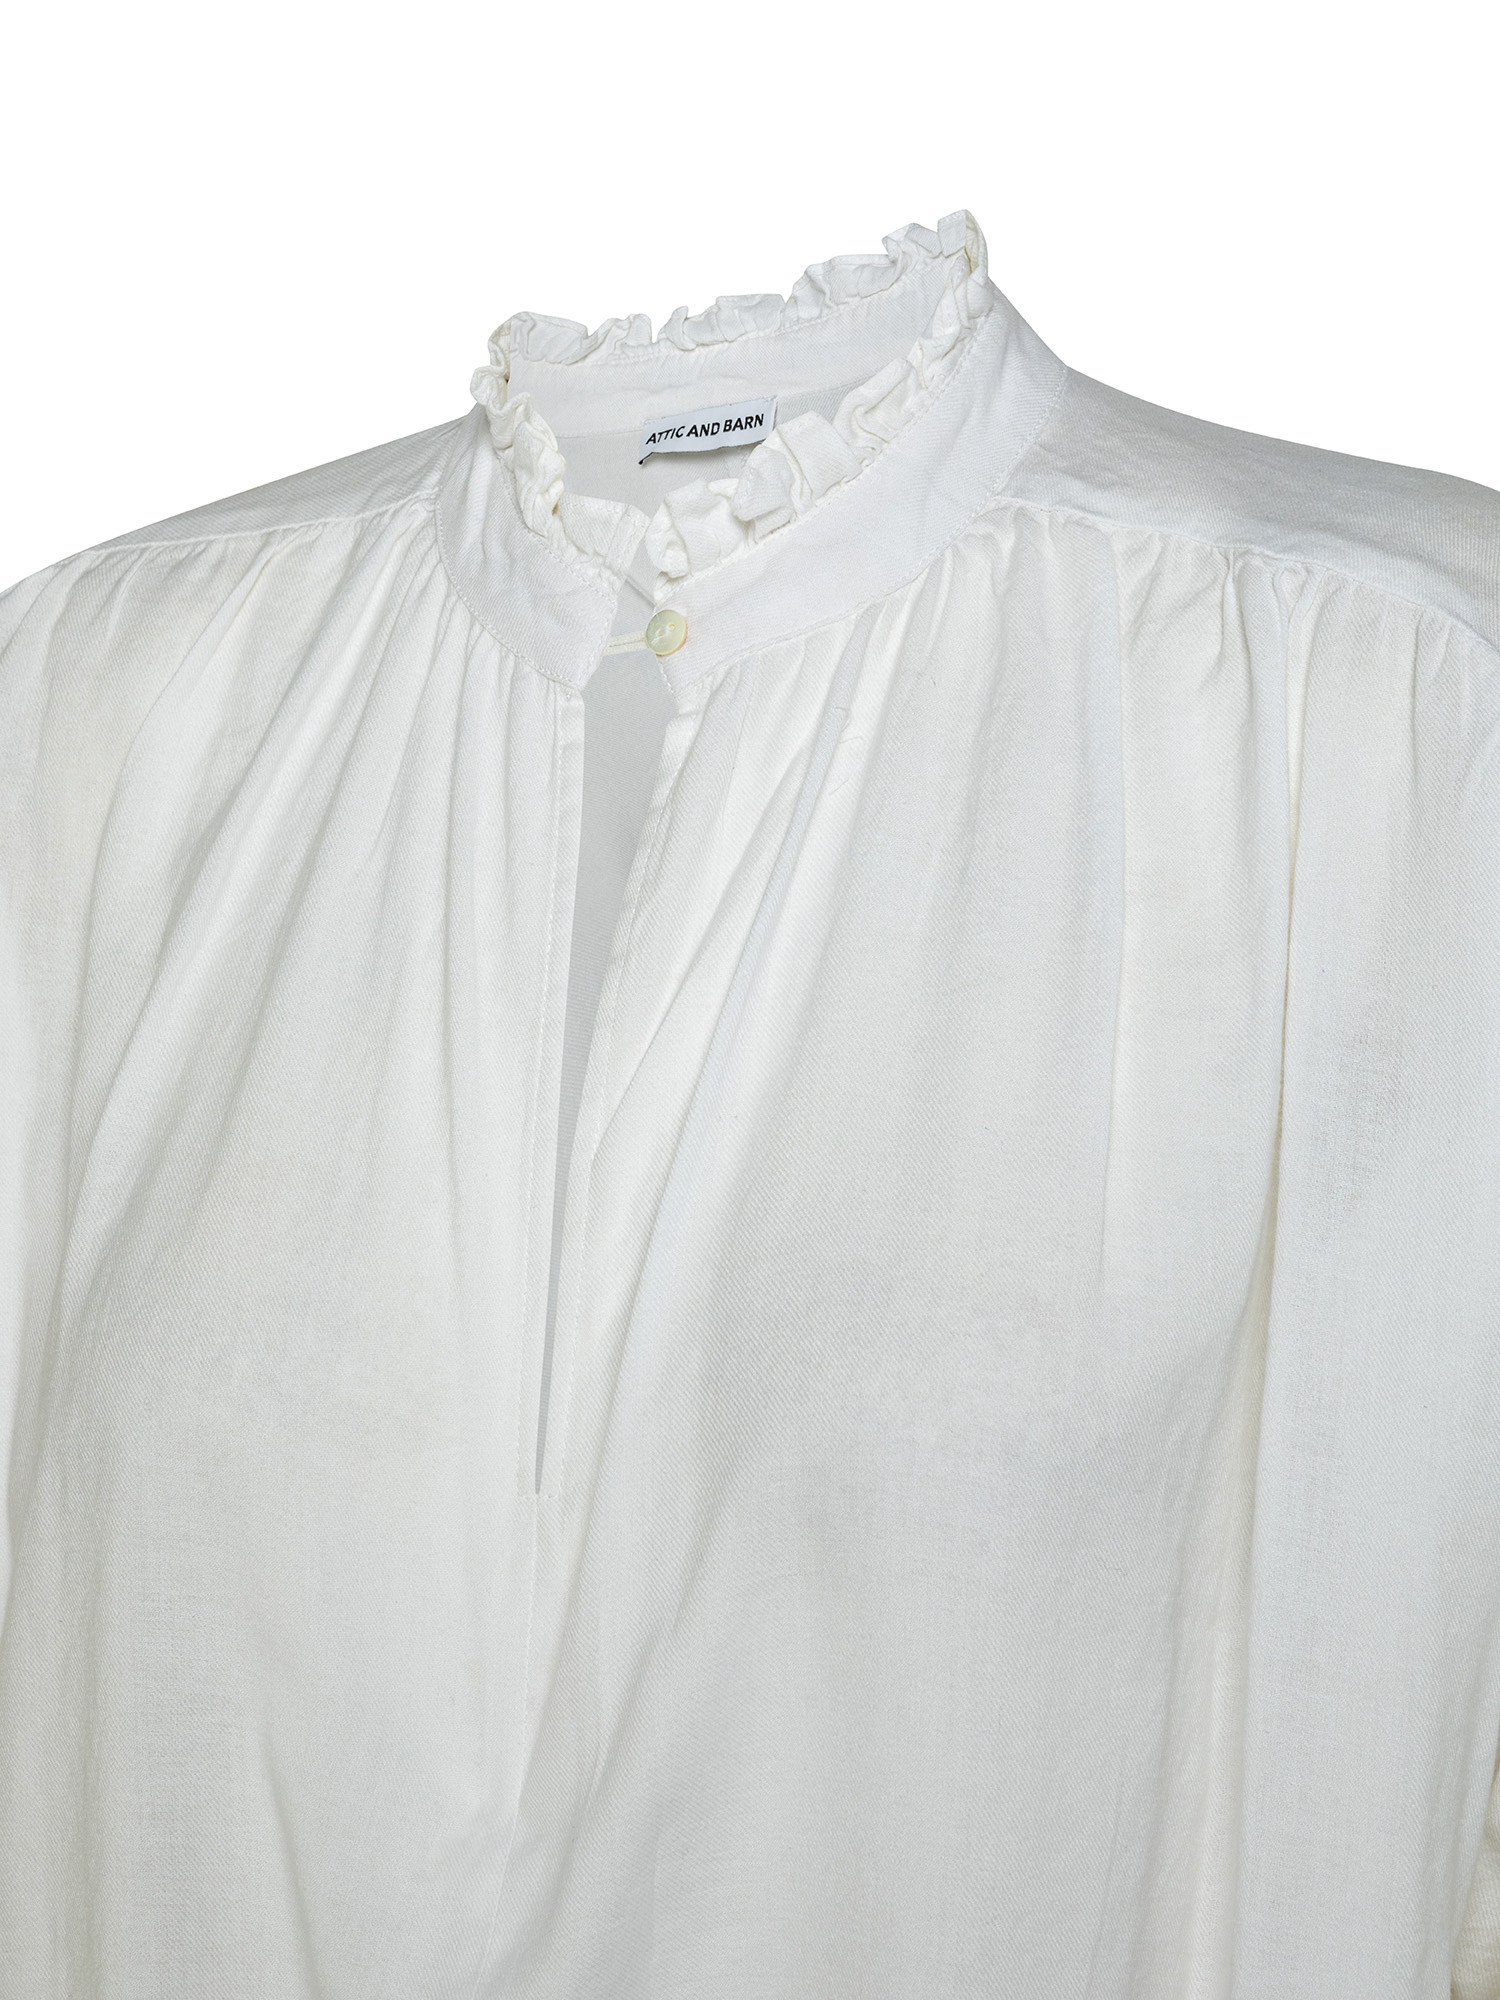 Blouse in cotton with long sleeves, White, large image number 2